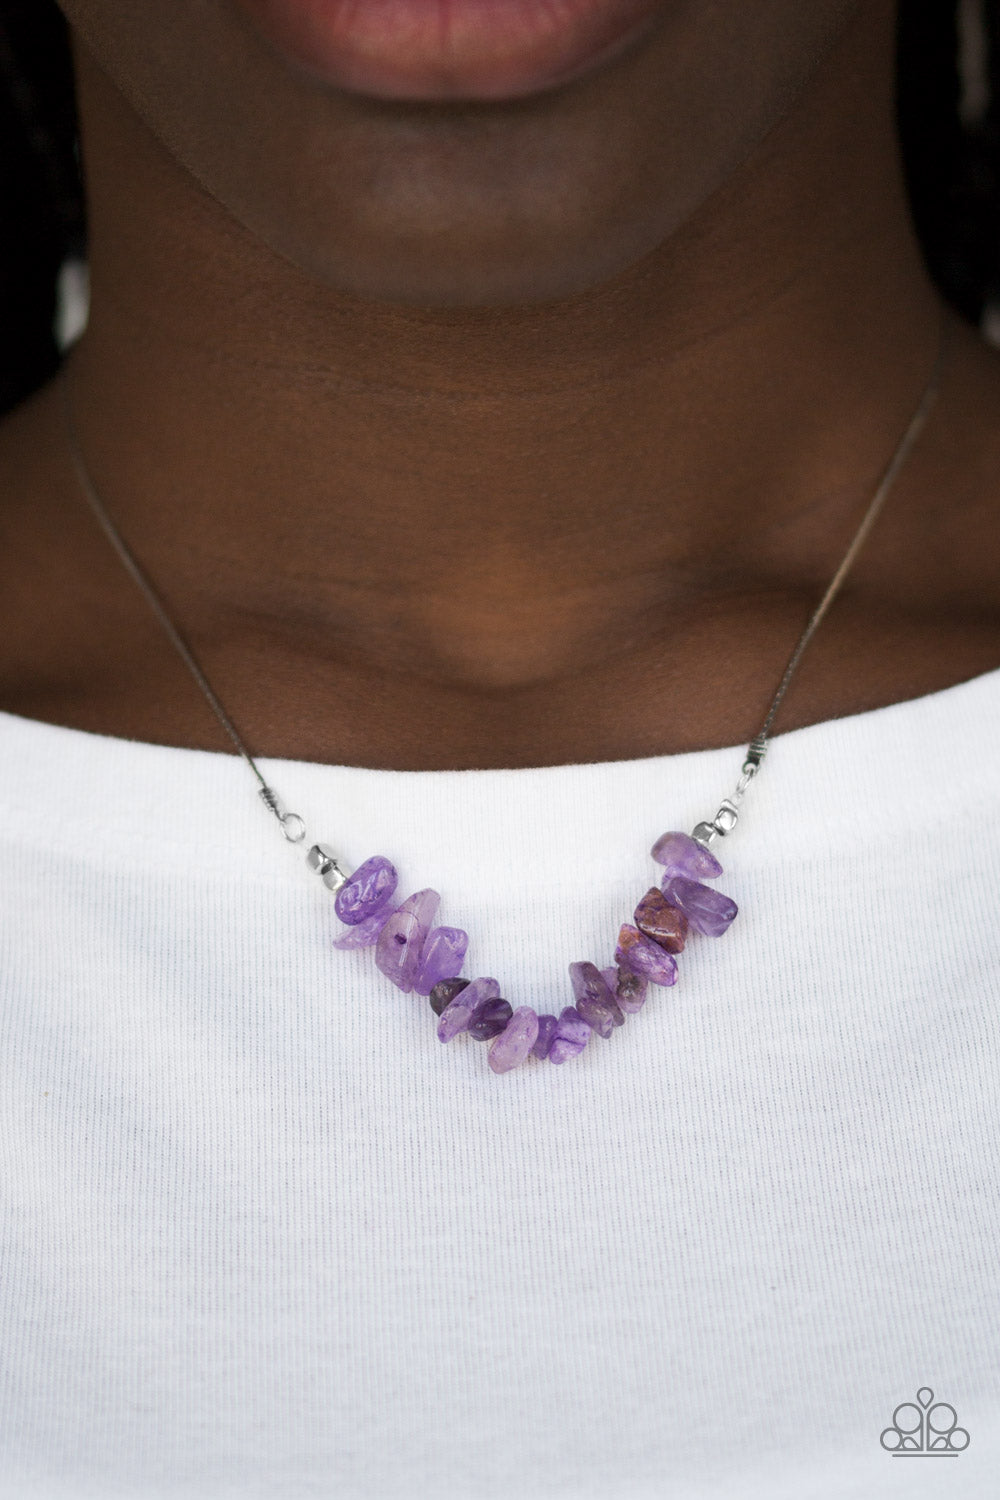 Back To Nature - Purple Necklace Paparazzi Accessories $5 Jewelry